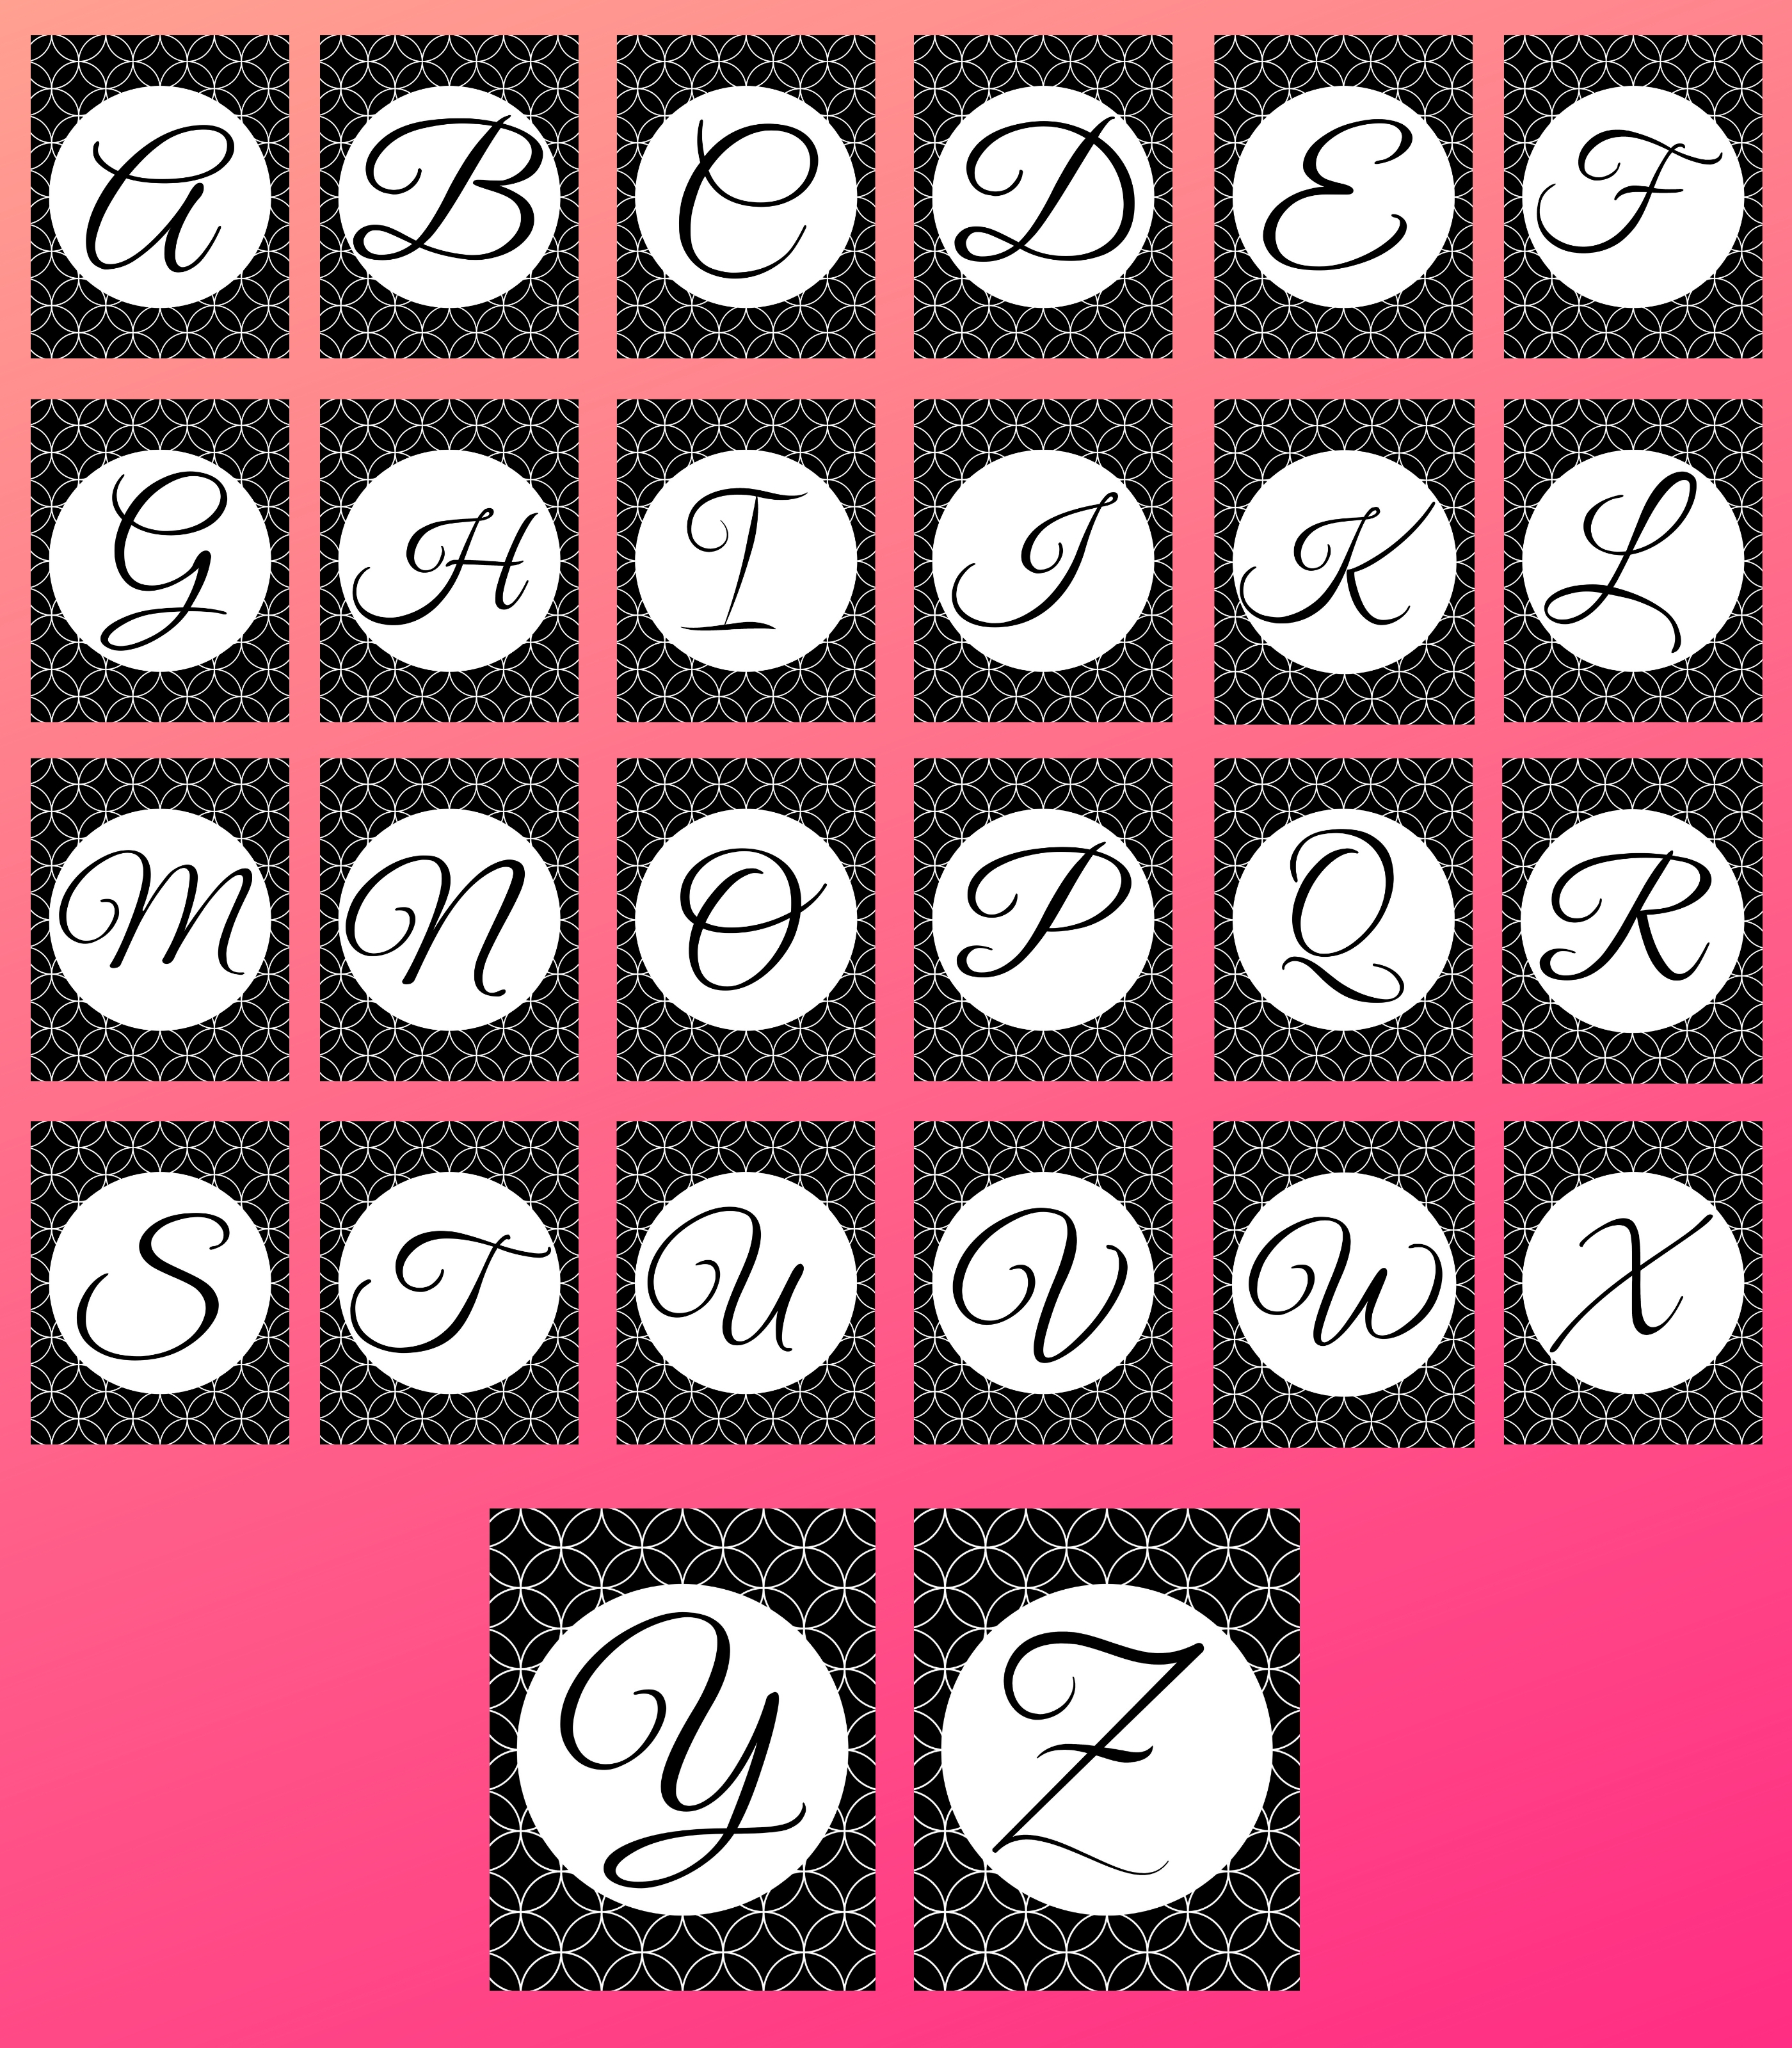 Initial printables in black cursive lettering on a white circle with a white an black pattern design in the background.